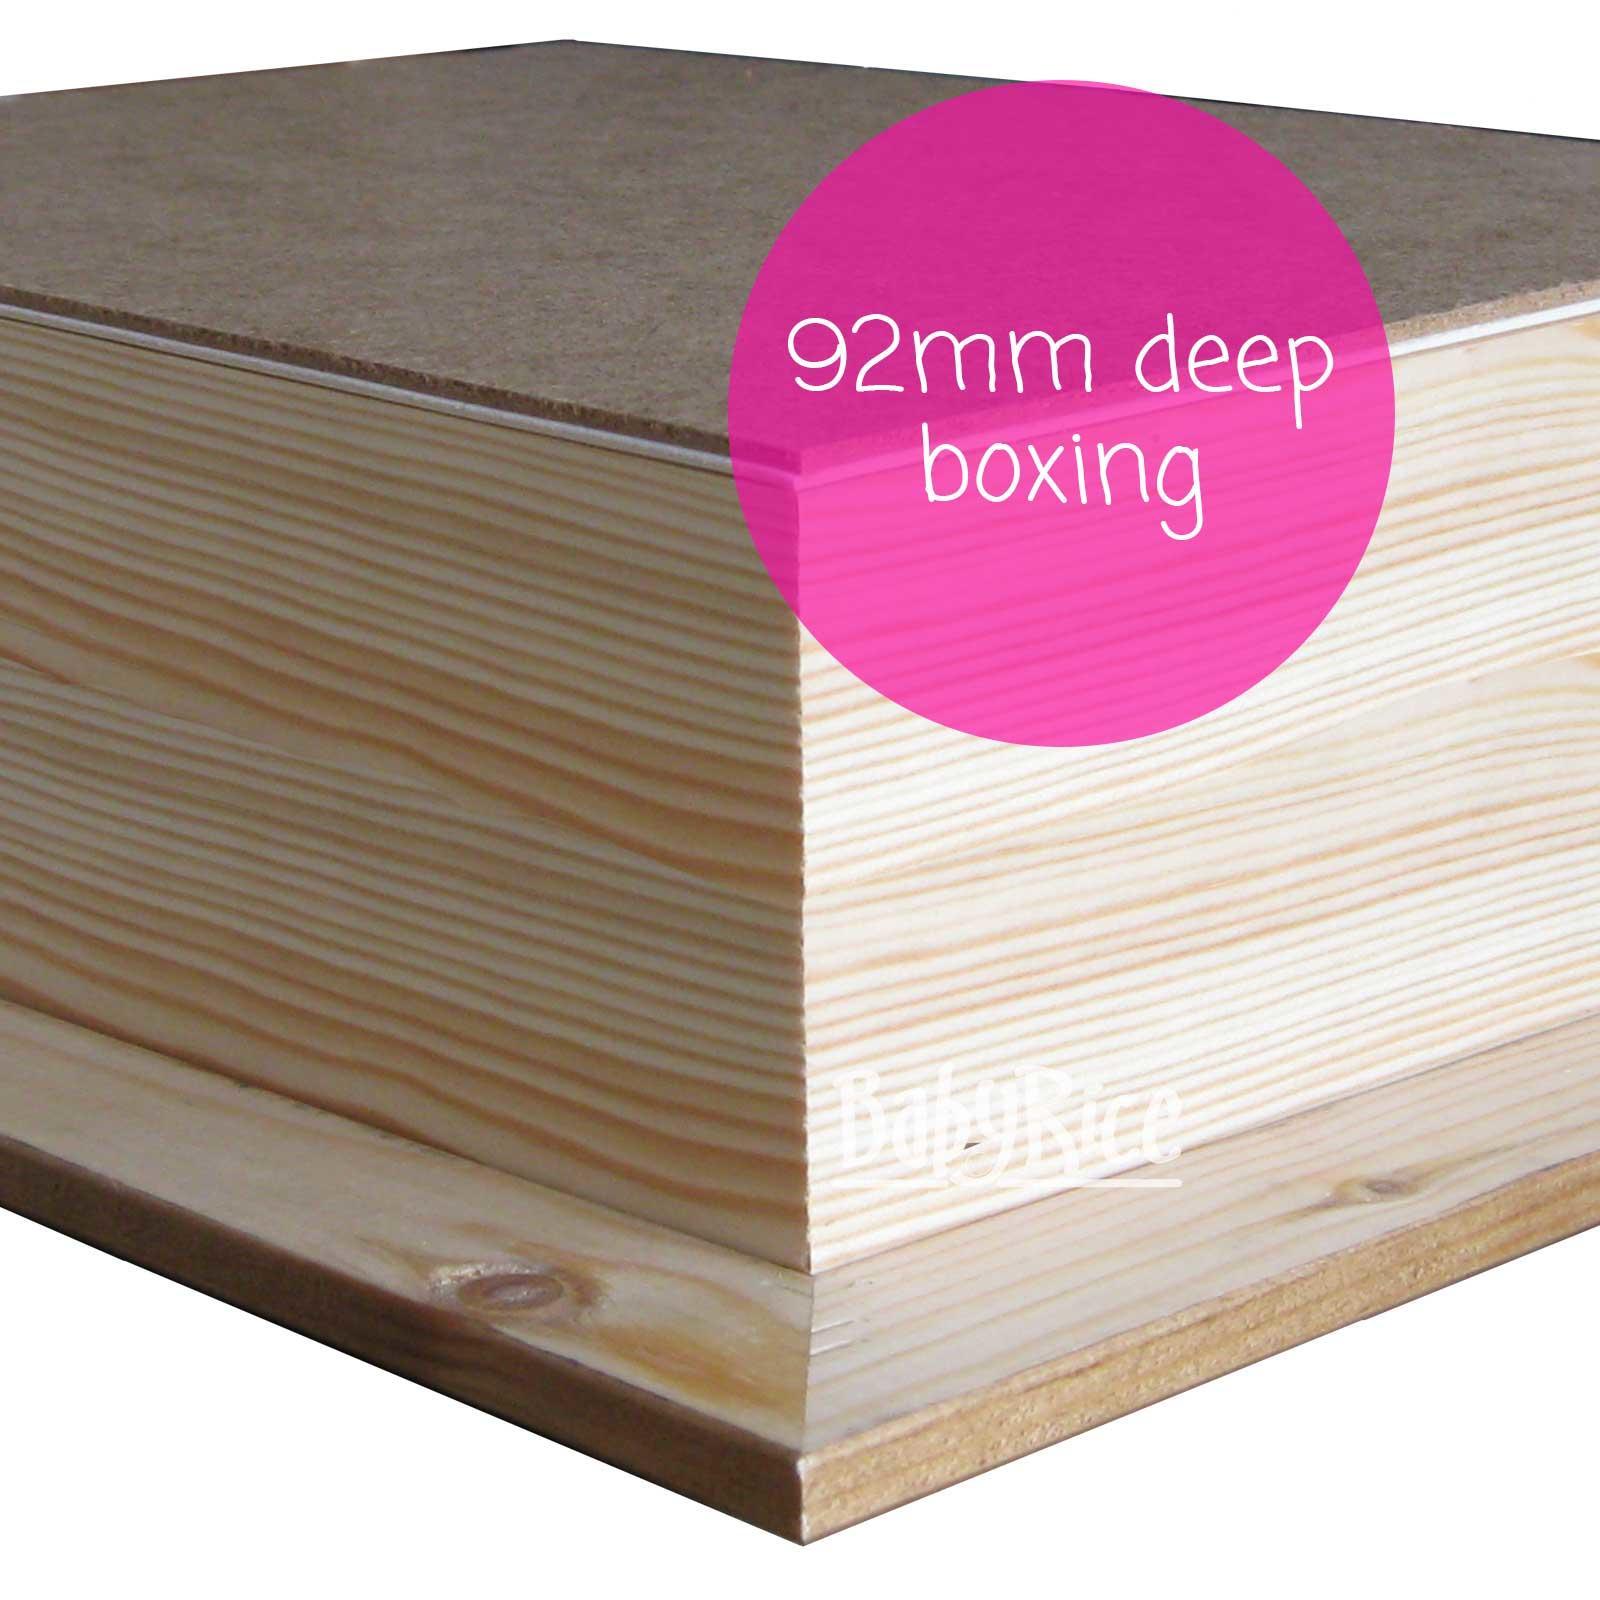 Example of rear pine box 92mm